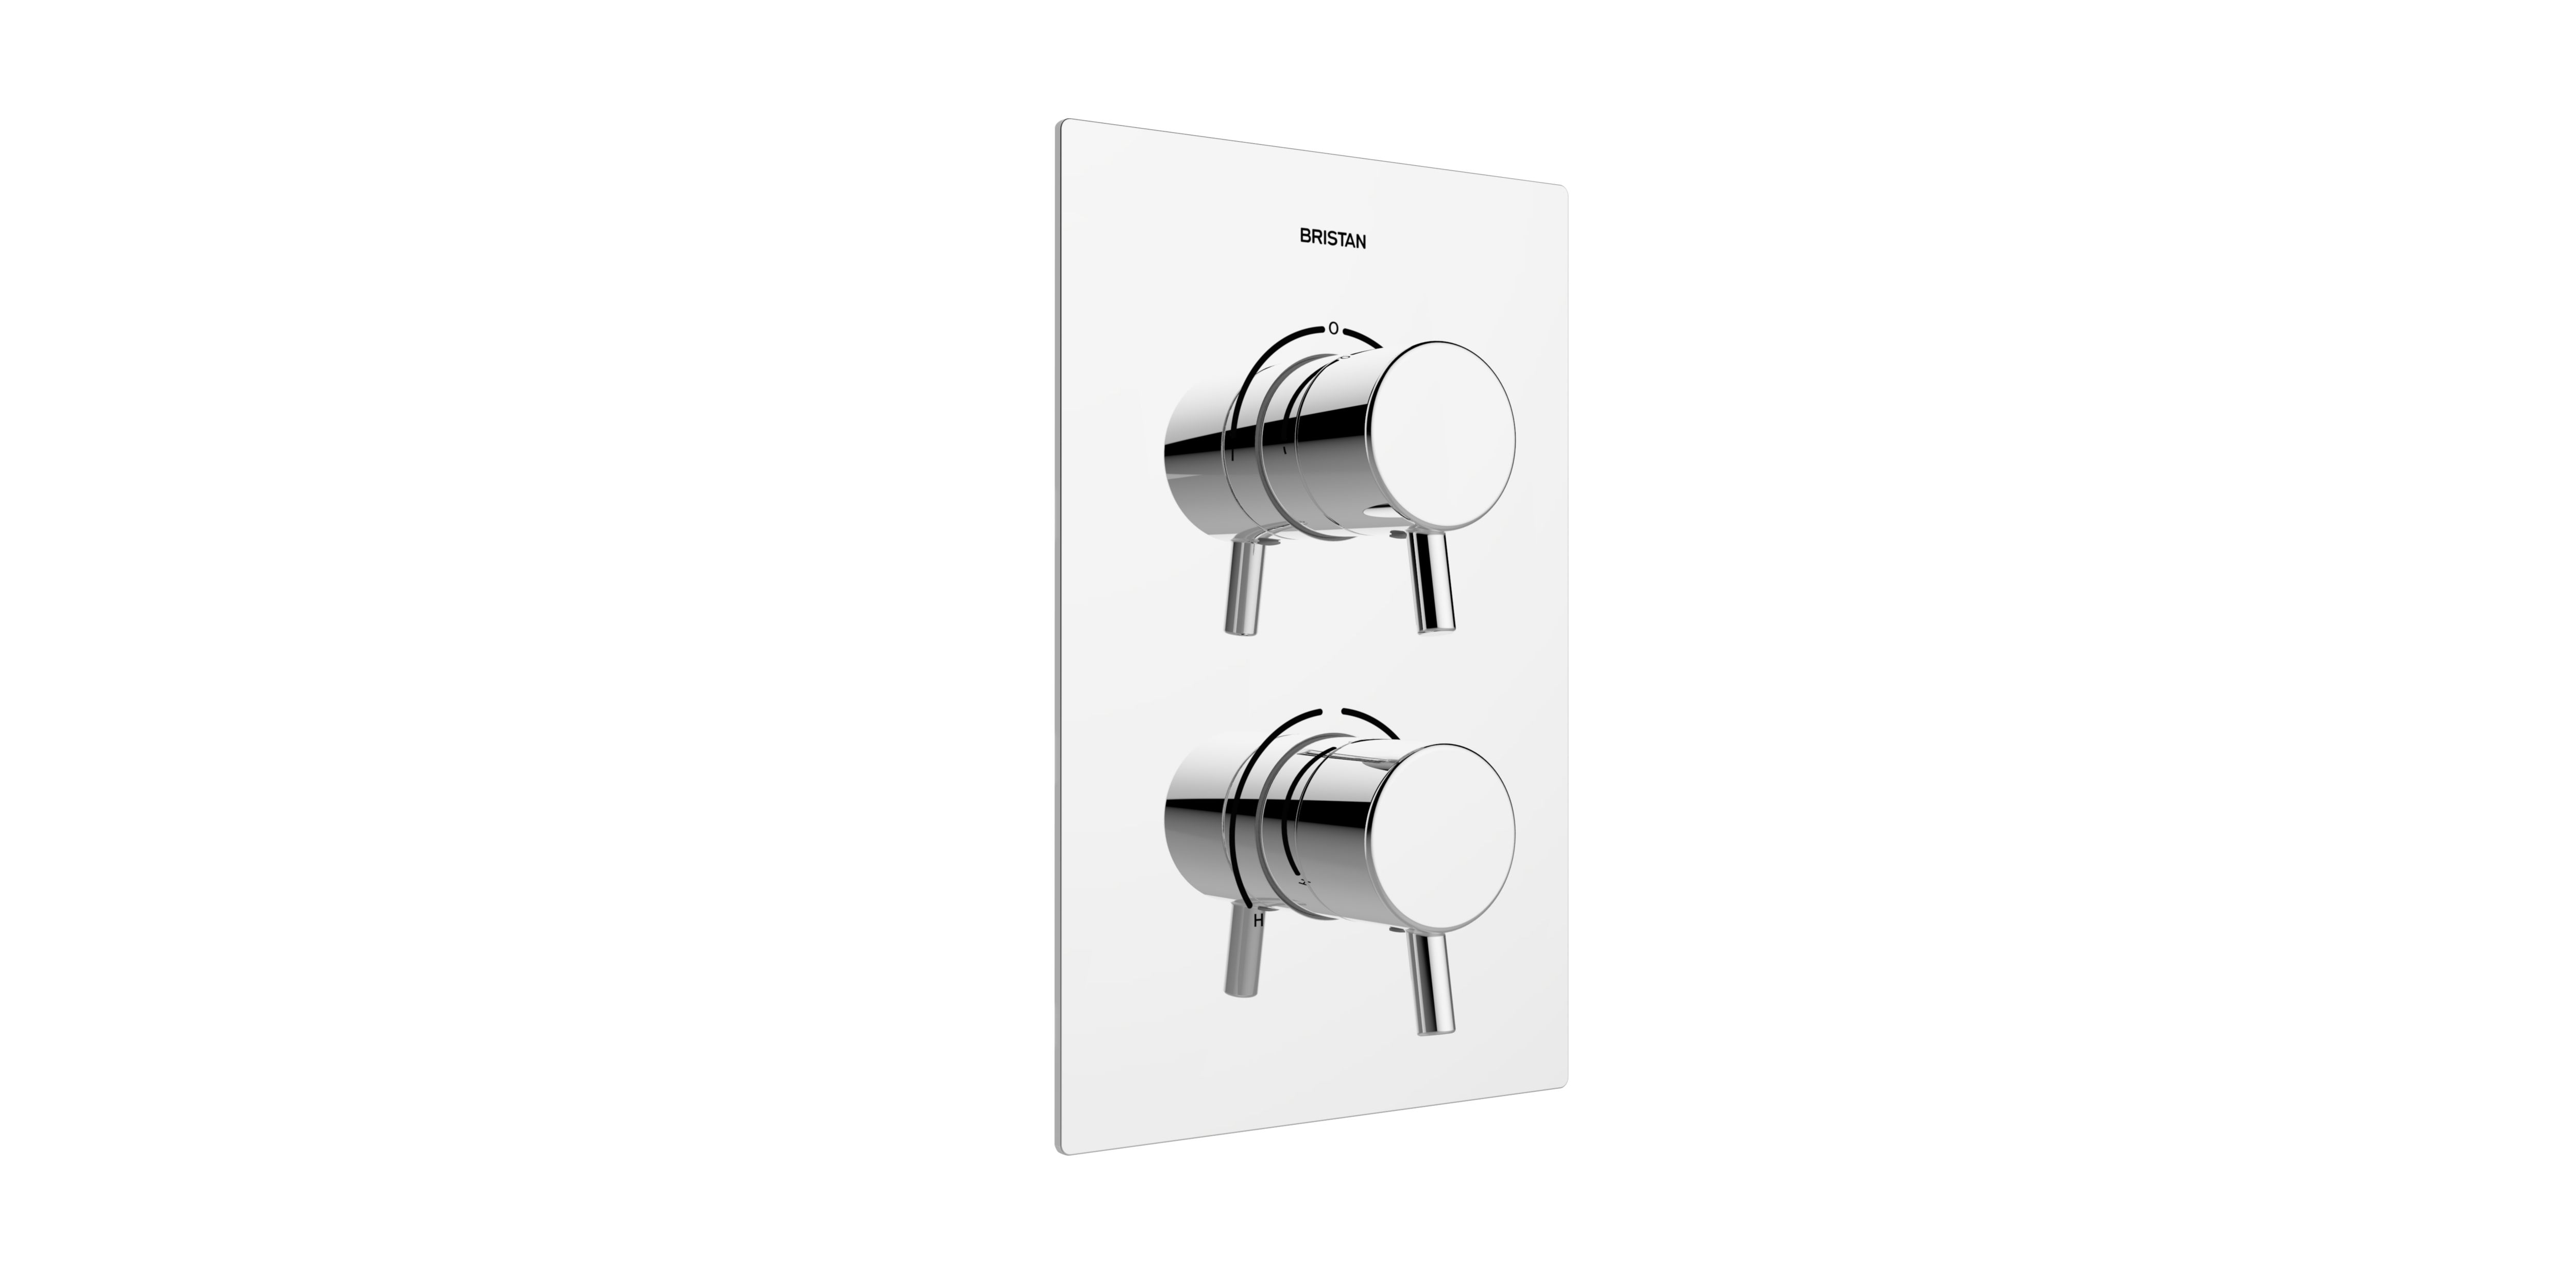 Image of Bristan Prism Recessed Thermostatic Dual Control Shower Valve with Integral Two Outlet Diverter - Chrome